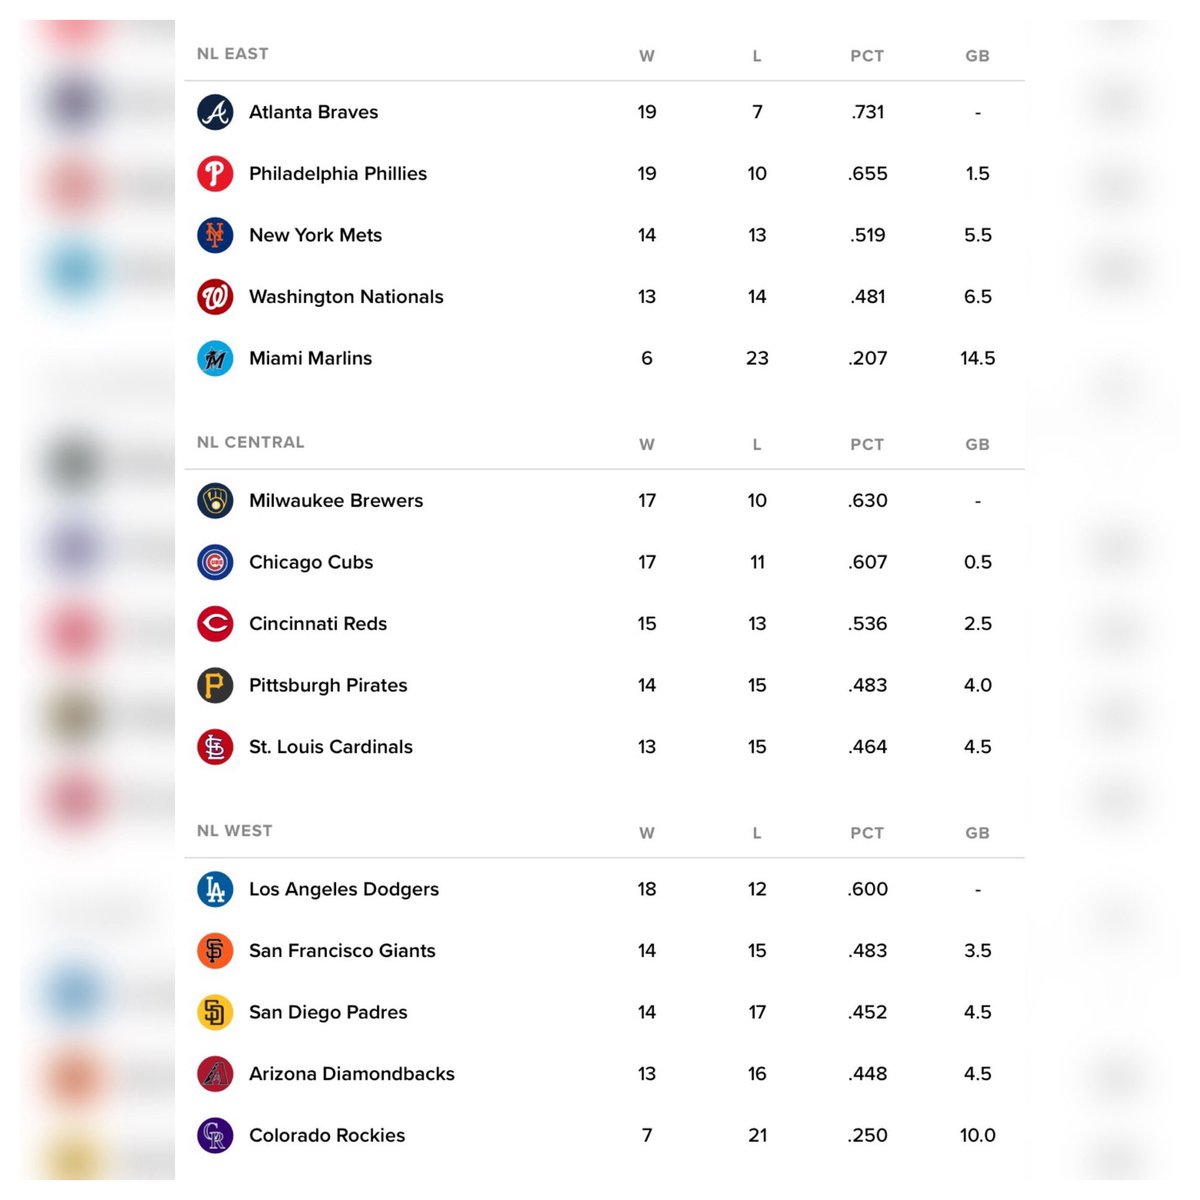 #MLB Standings After Week 4 #RingTheBell #LetsGoBucs #StraightUpTX #RaysUp #DirtyWater #ATOBTTR #MLBTwitter ⚾️ #WreckLeaguePodcast